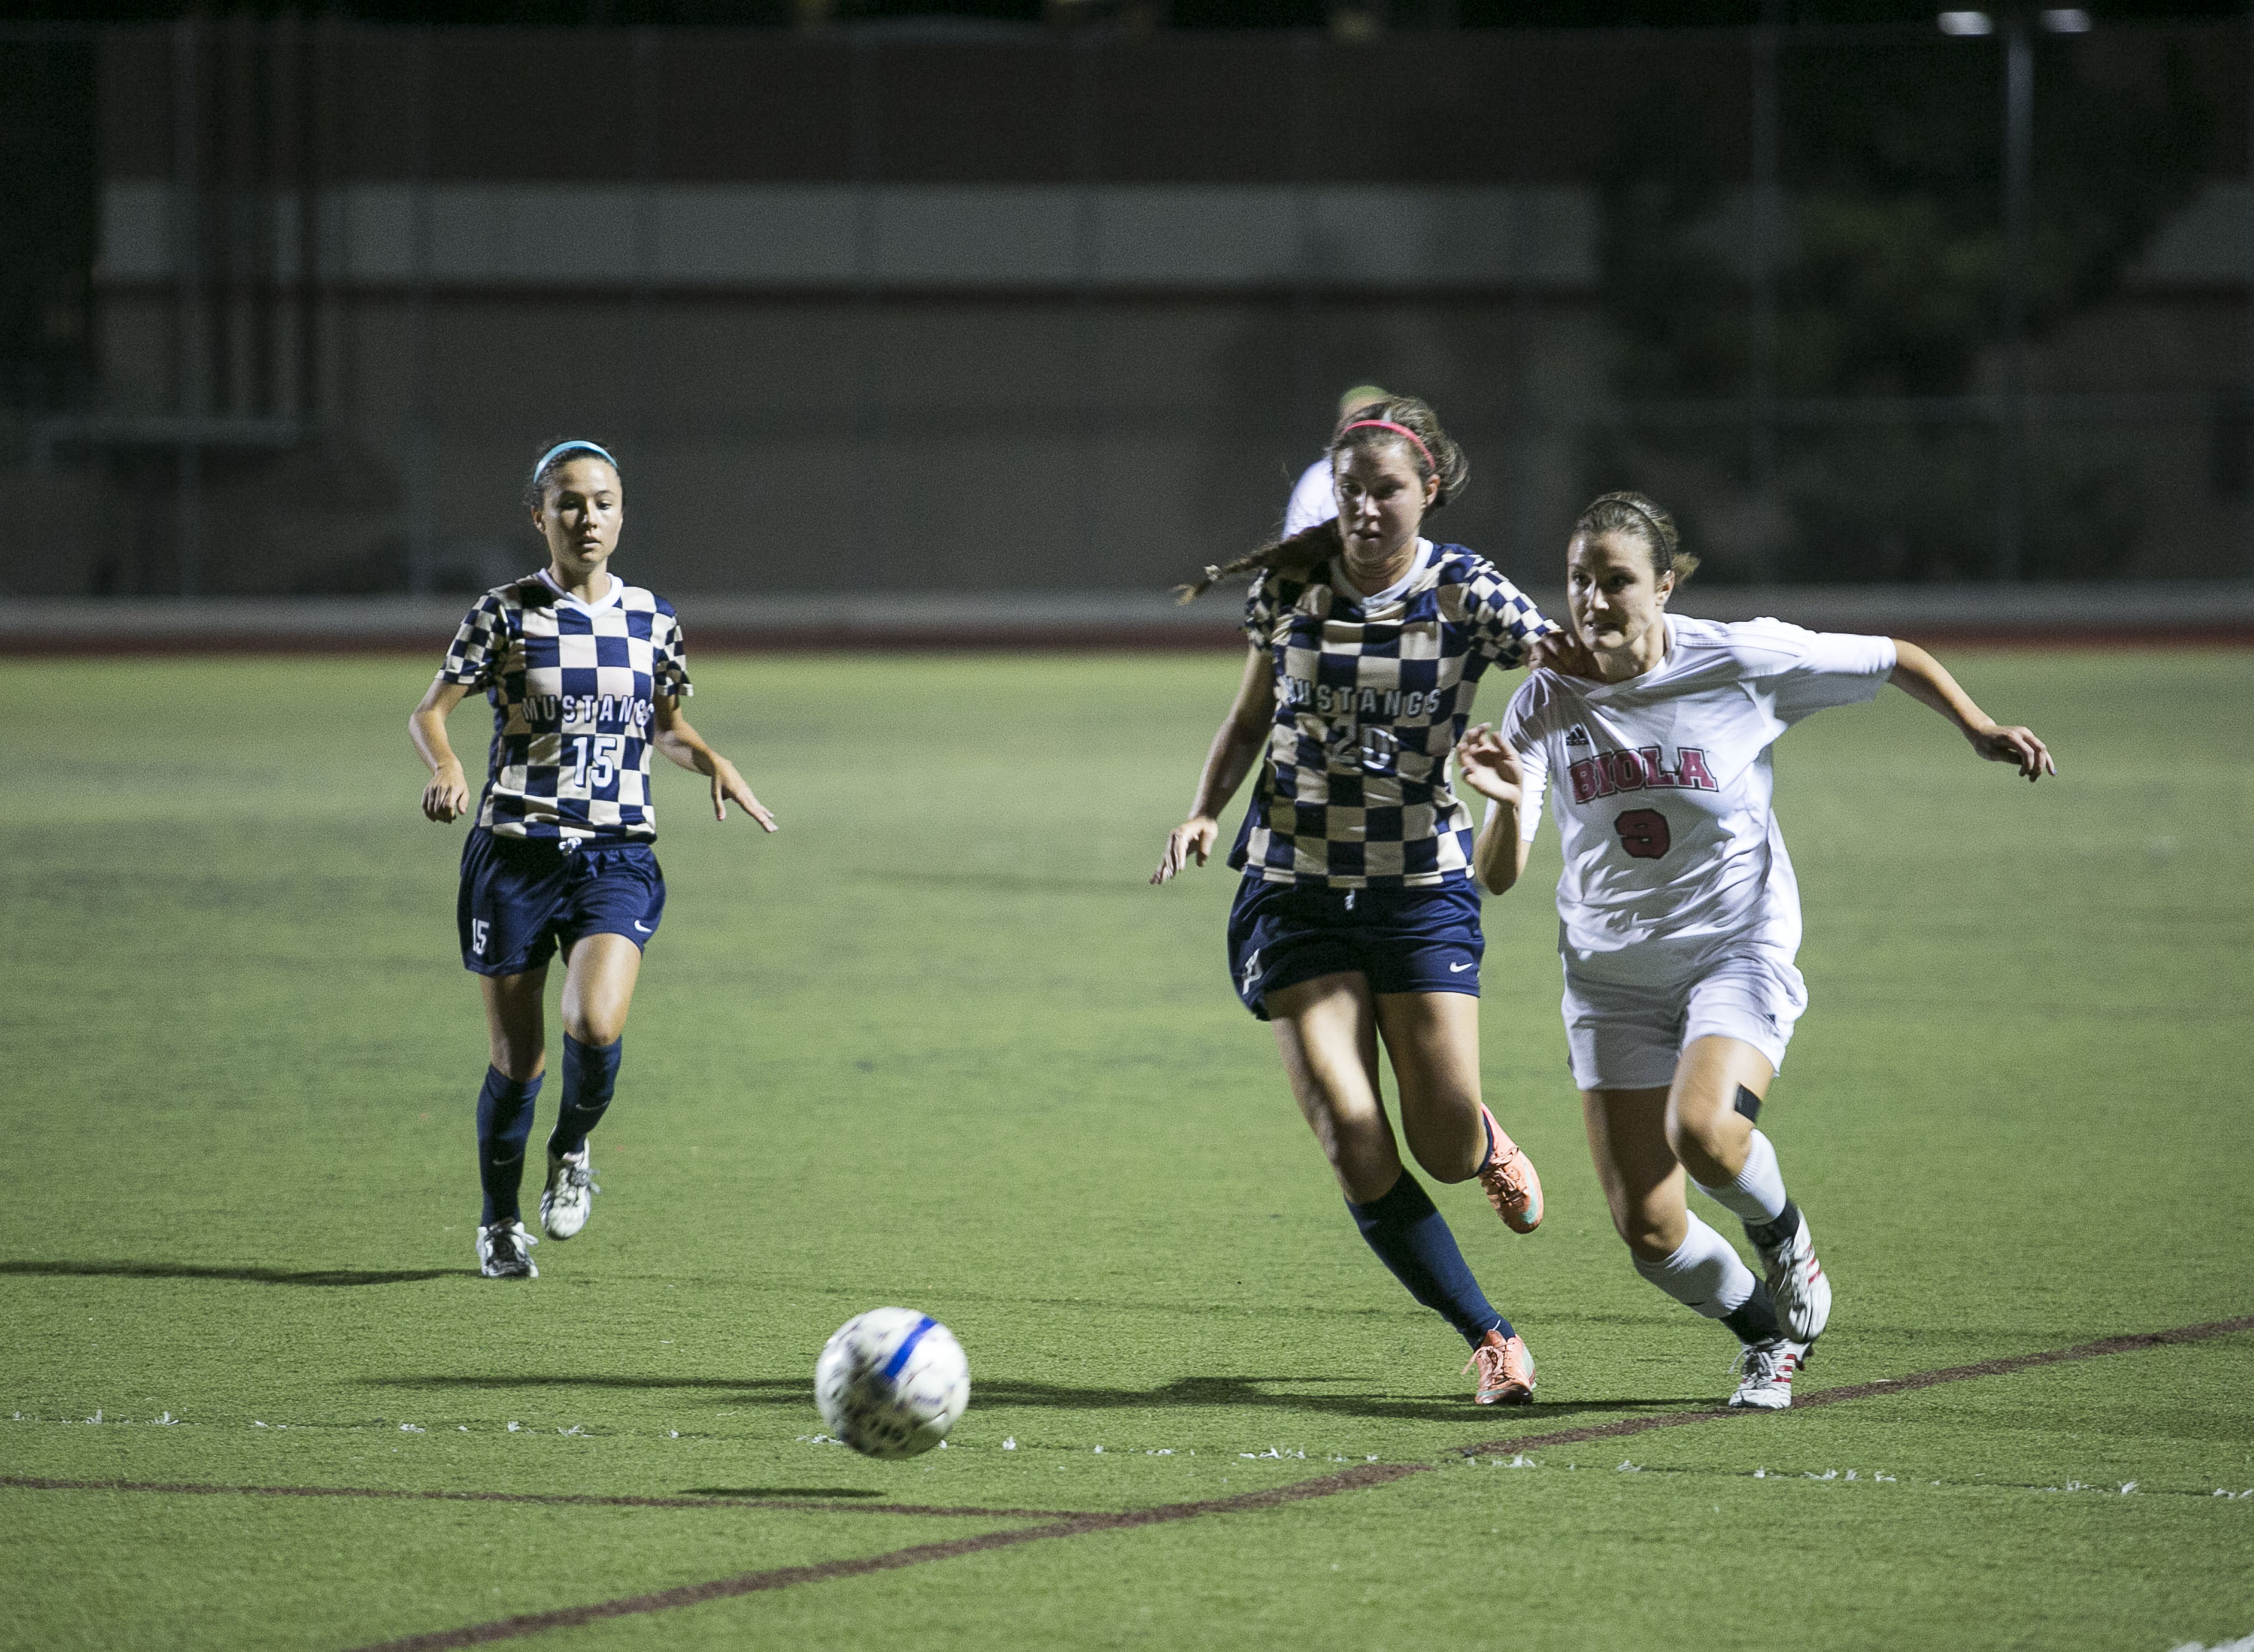 Senior Morgan Aukshunas steals the ball away from Masters on the way down the field. | Tomber Su/THE CHIMES